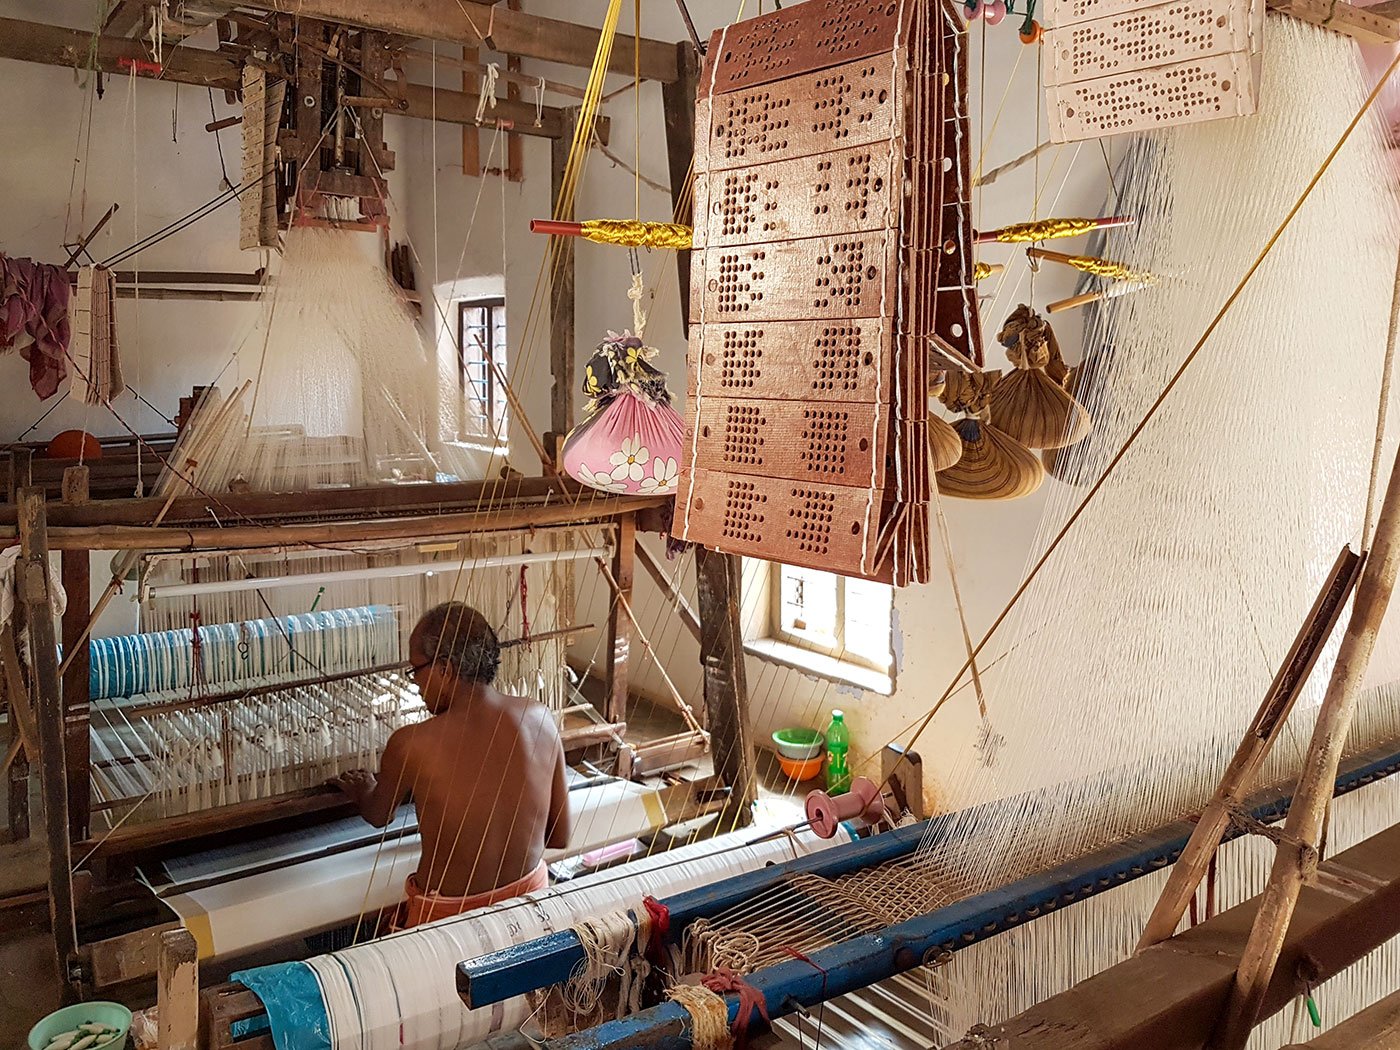 Mani works on a loom inside his home.